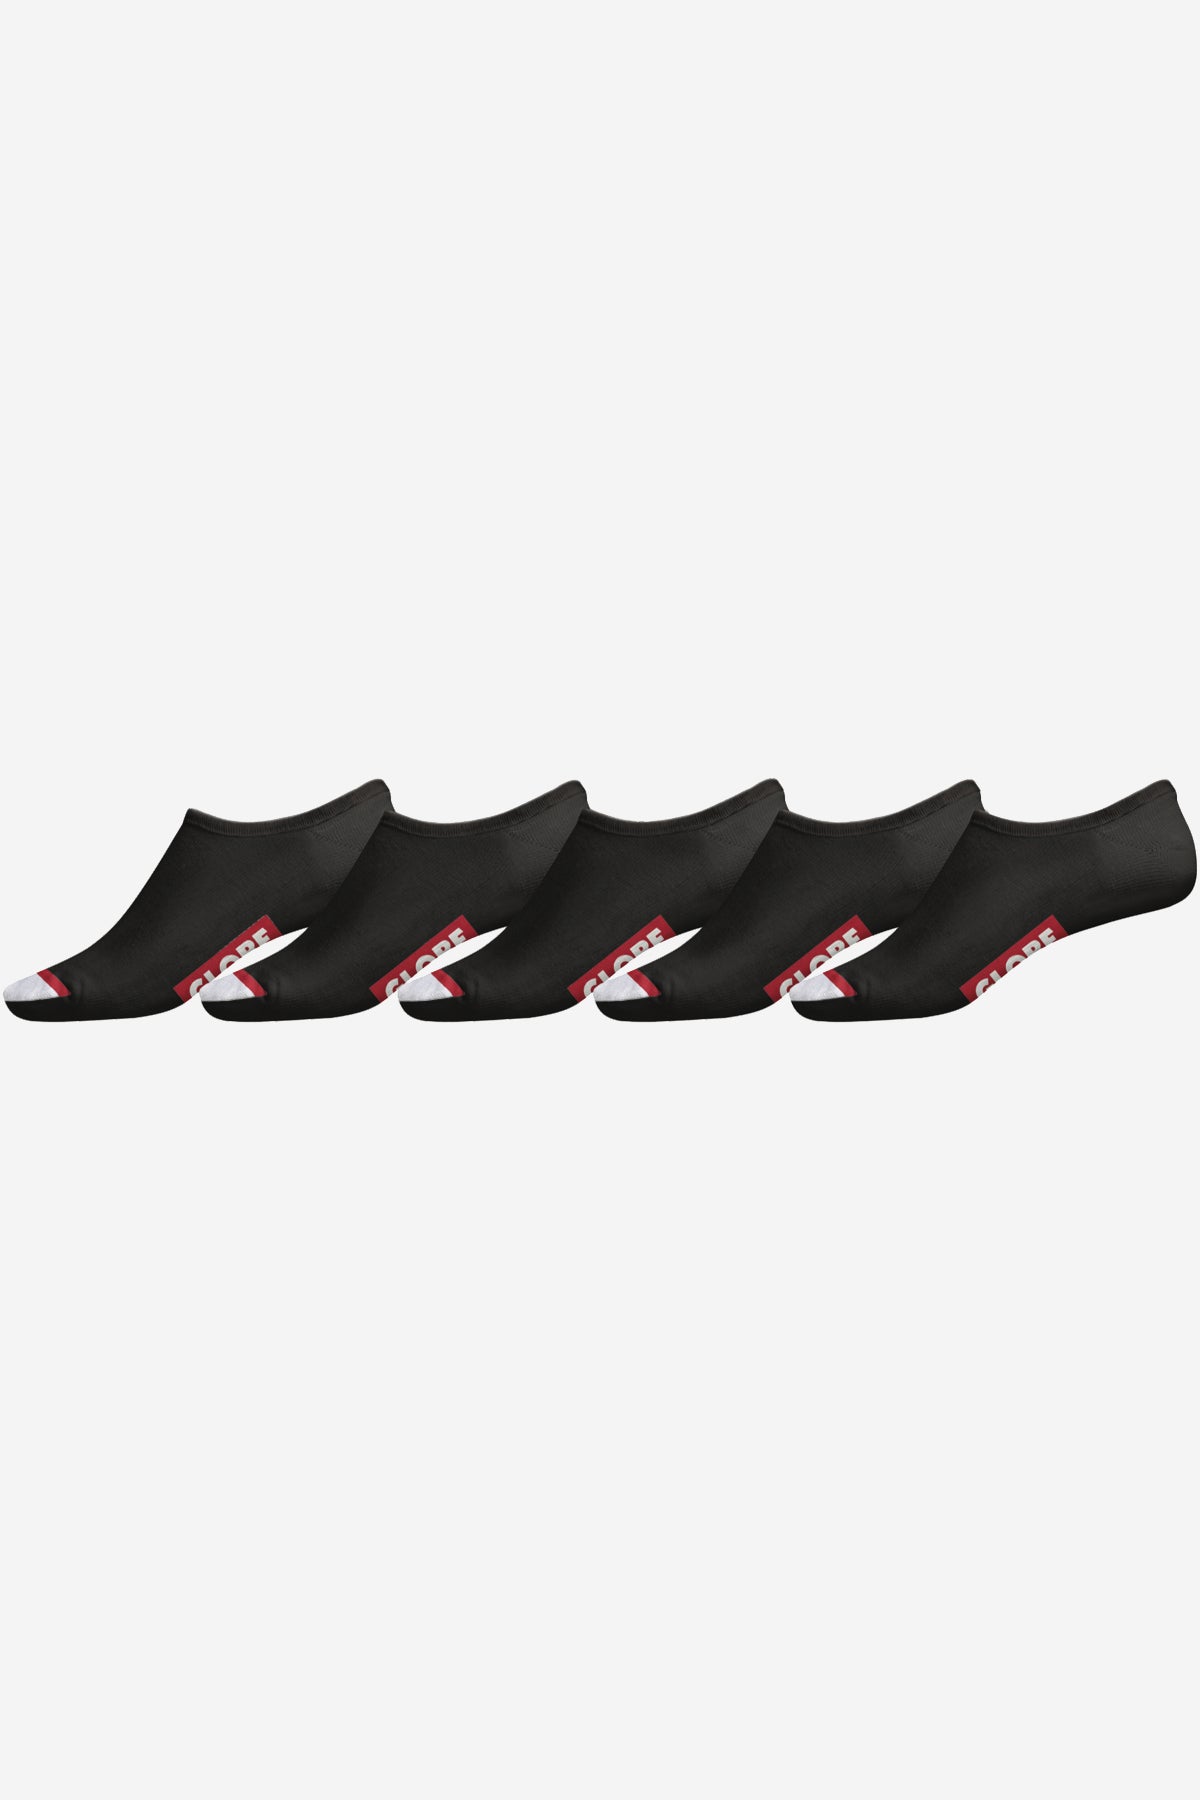 W/Tipper Invisible Sock 5 Pack - Black